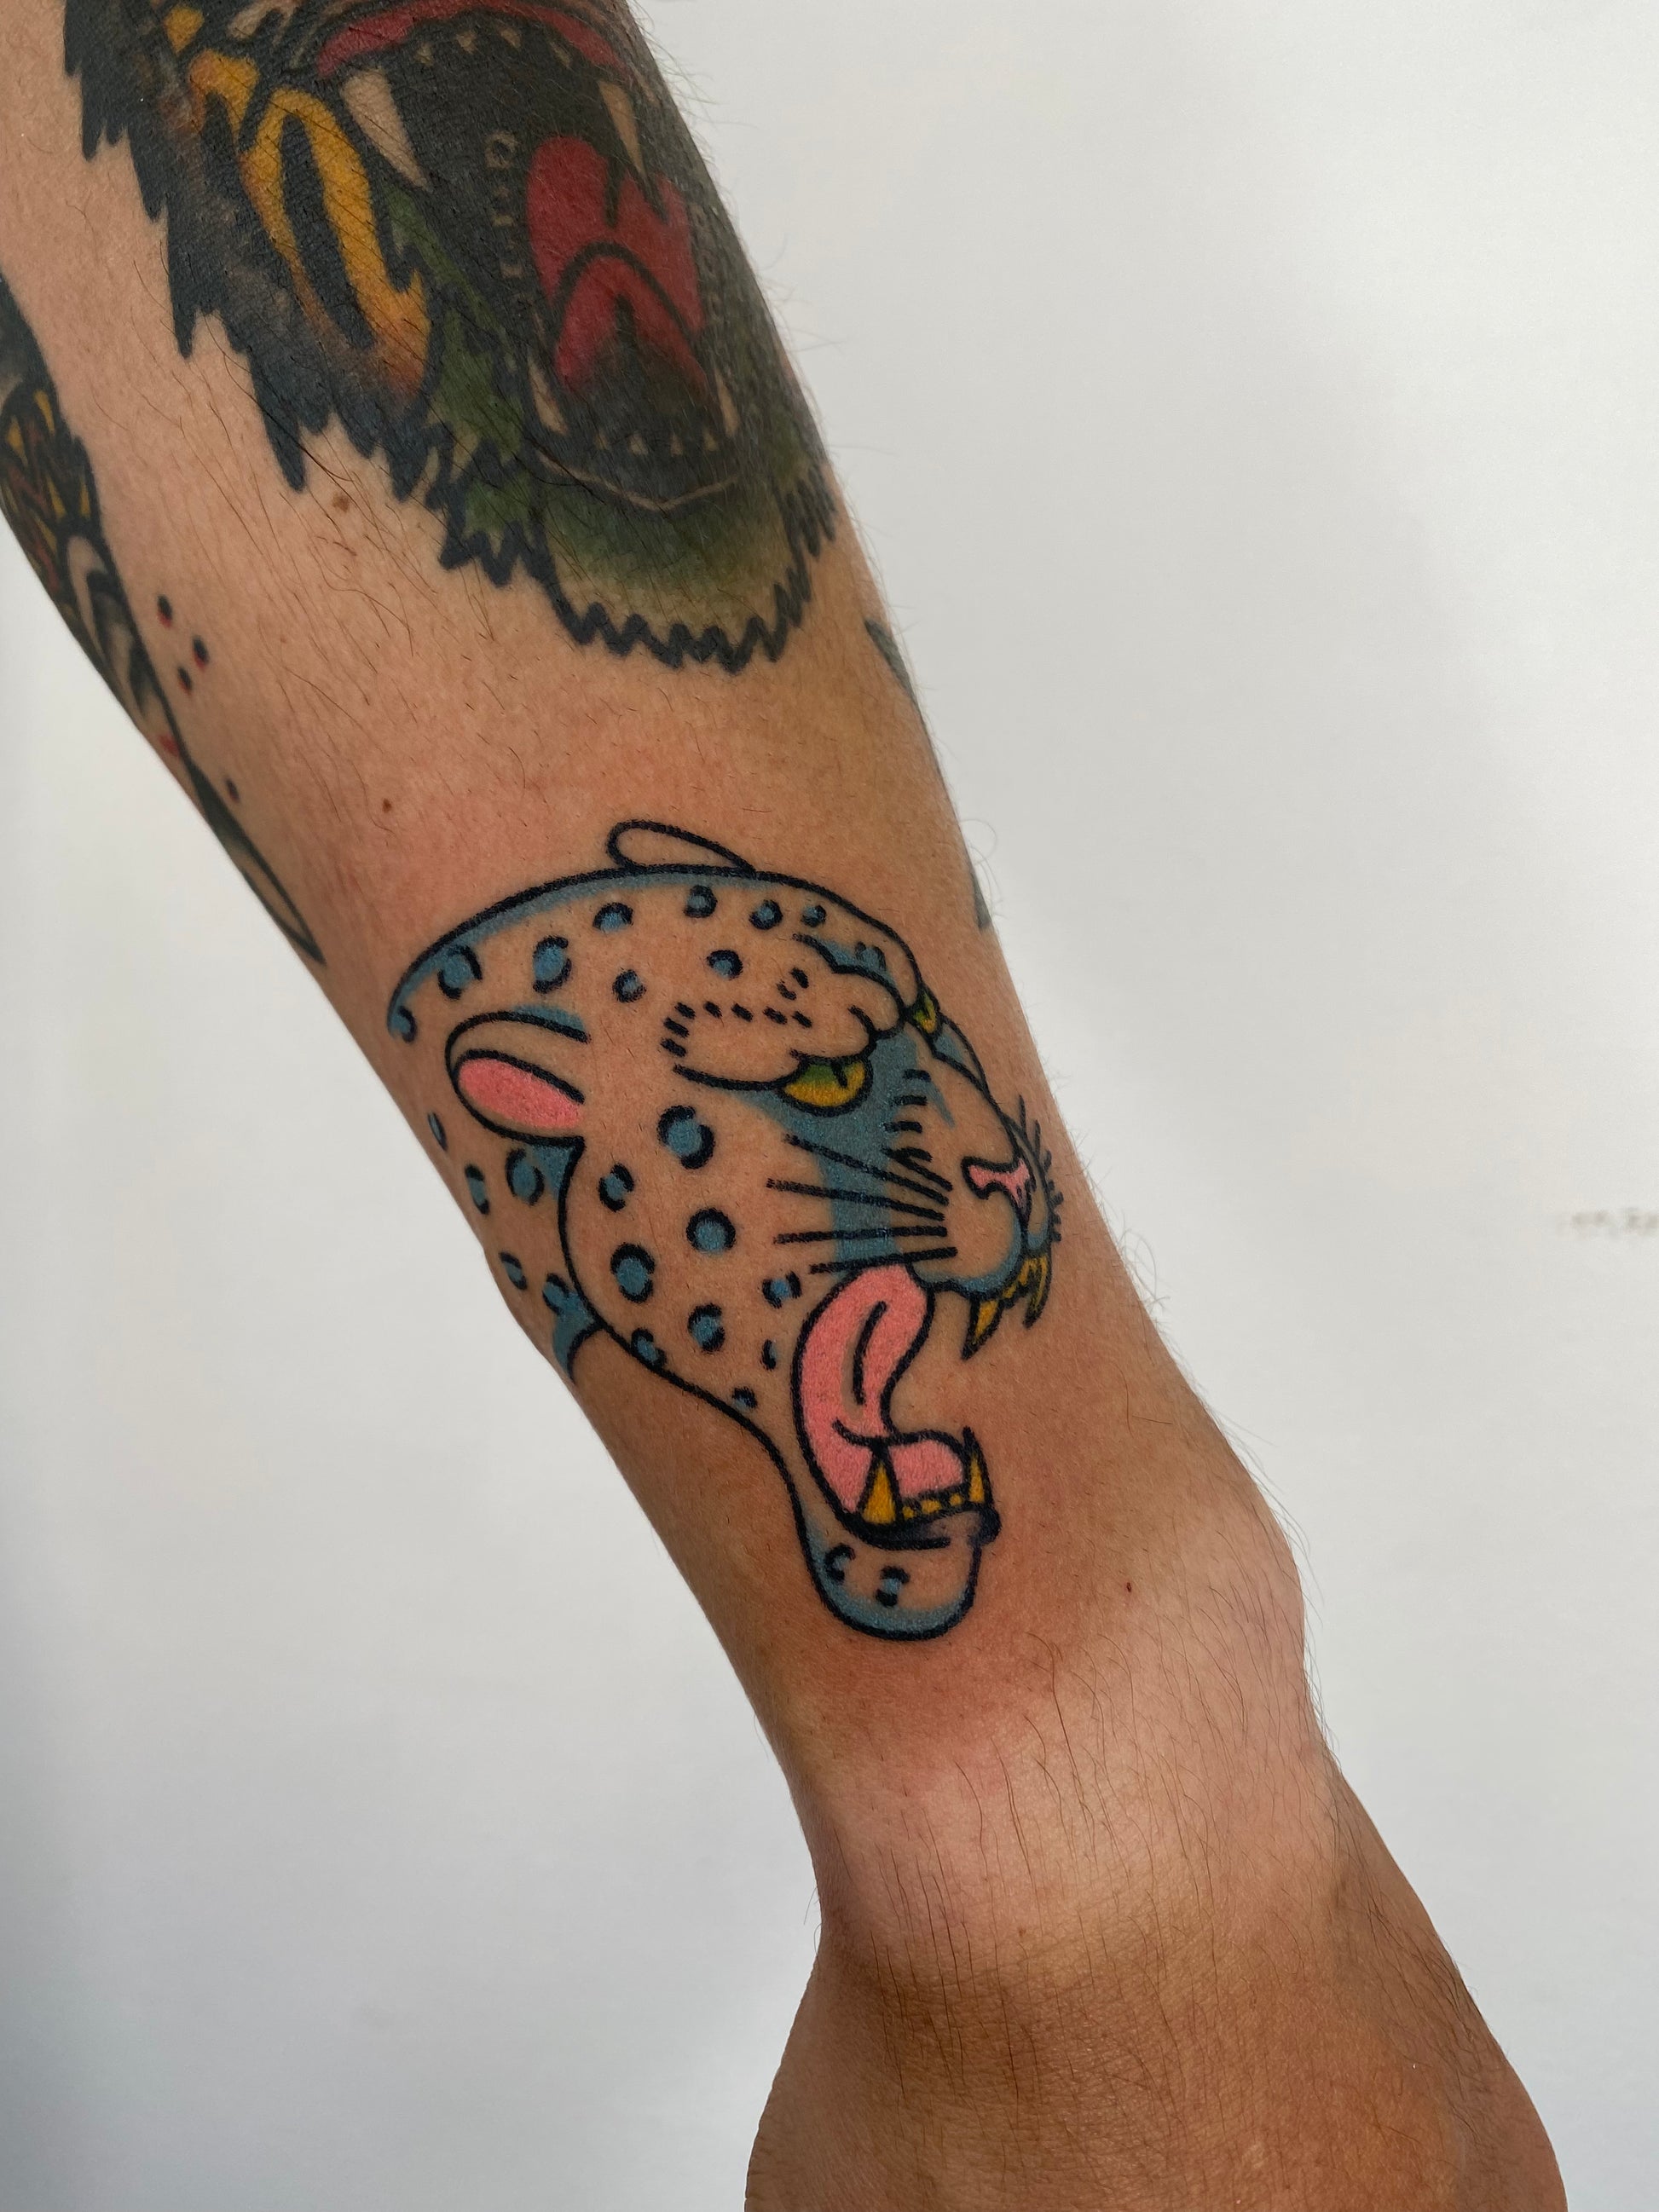 Tattoo Workshop "Learning Handpoke" with Moshi in Barcelona, Spain by subcultours